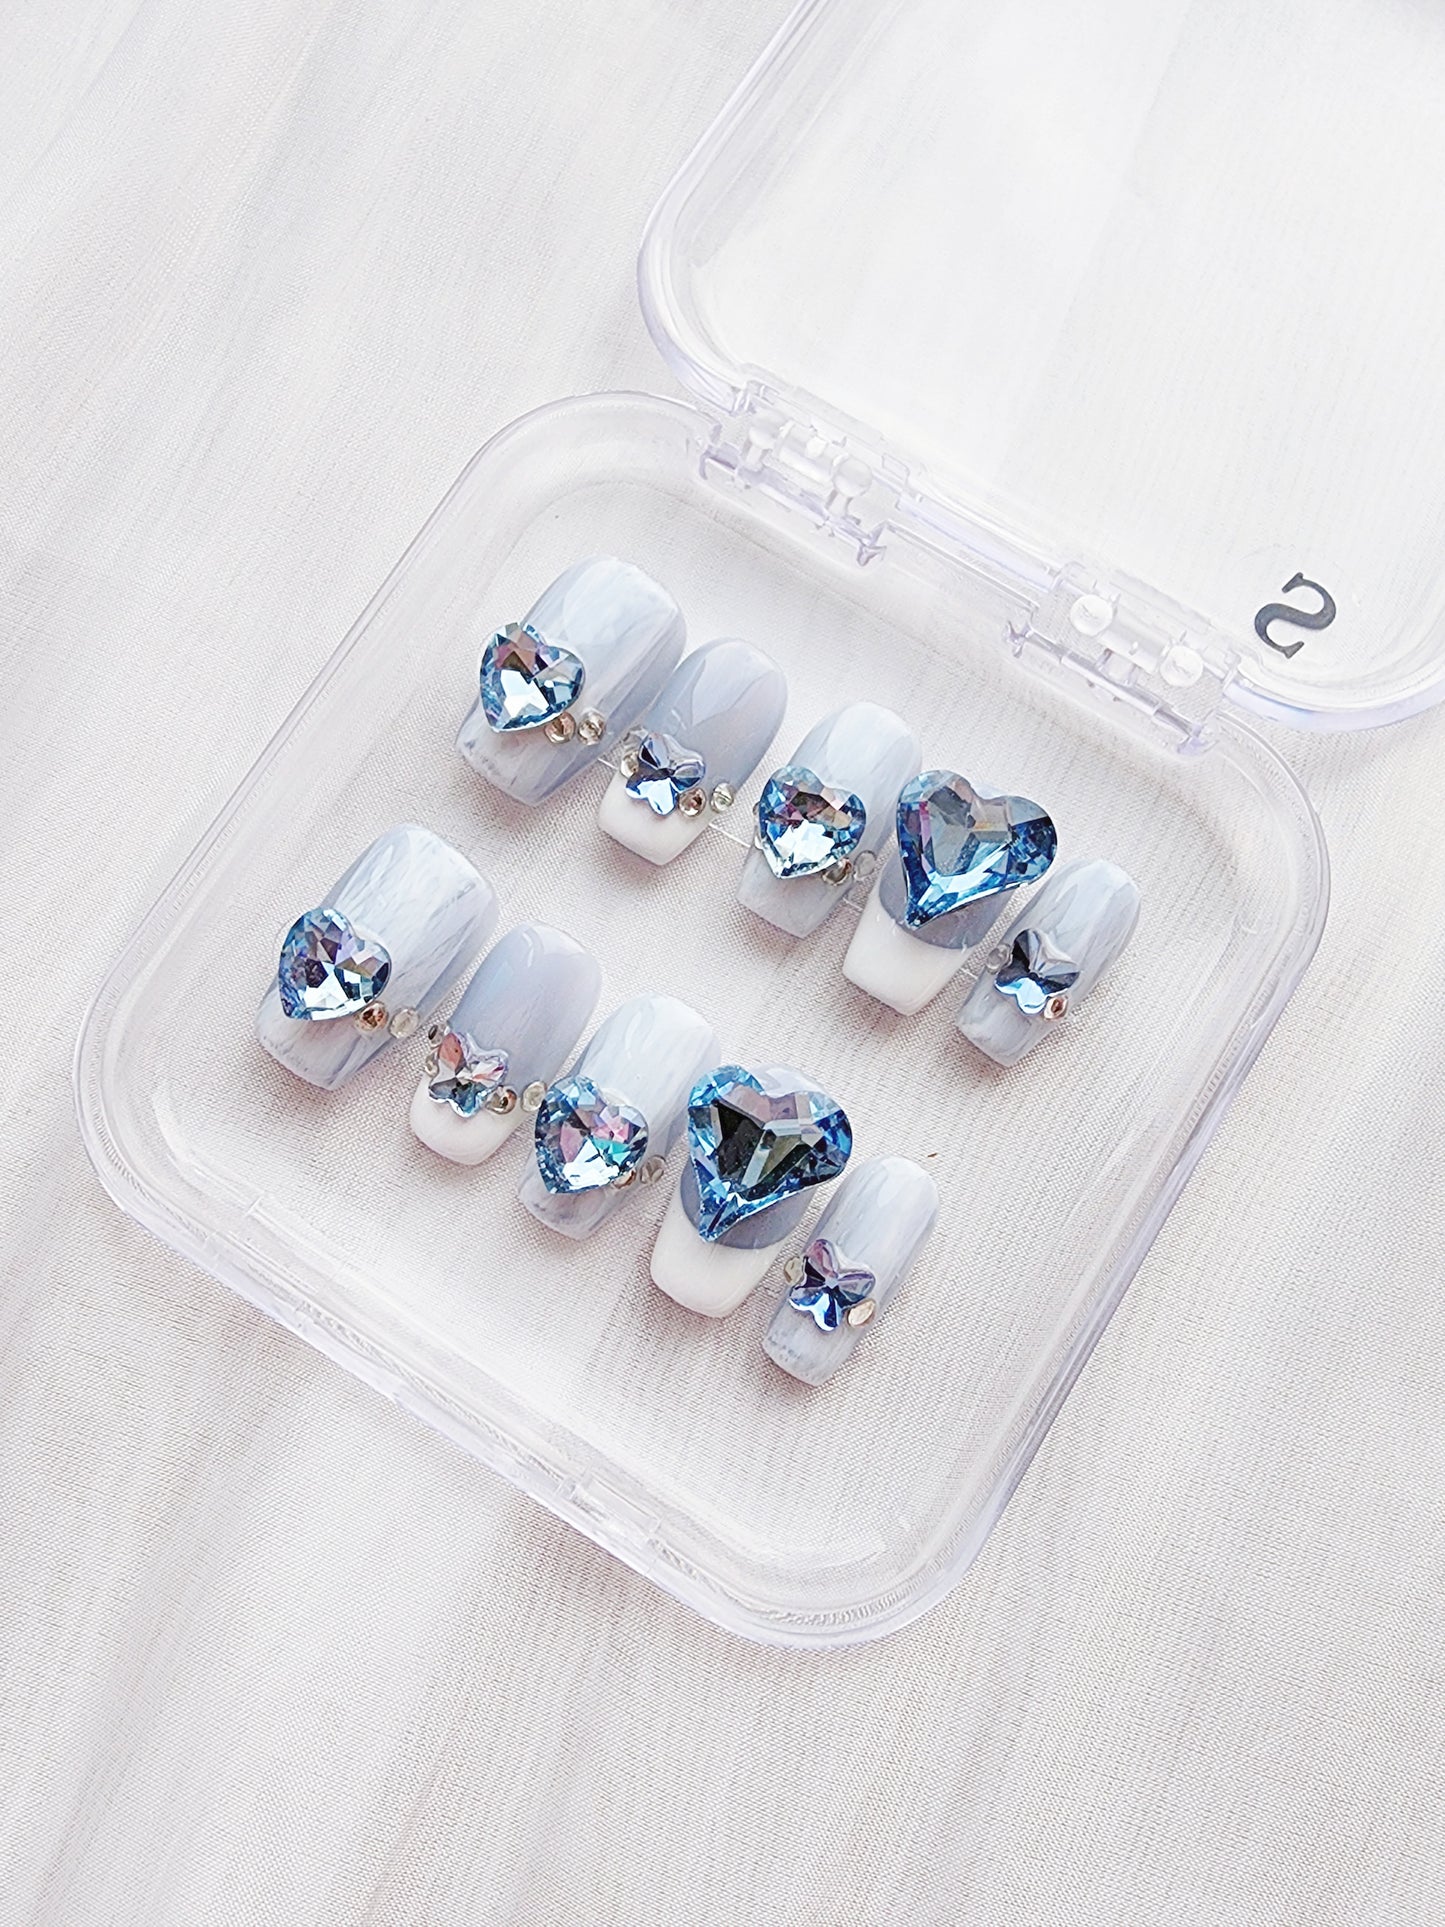 [N03] Blue & White with Diamonds Press On Manicure Nails